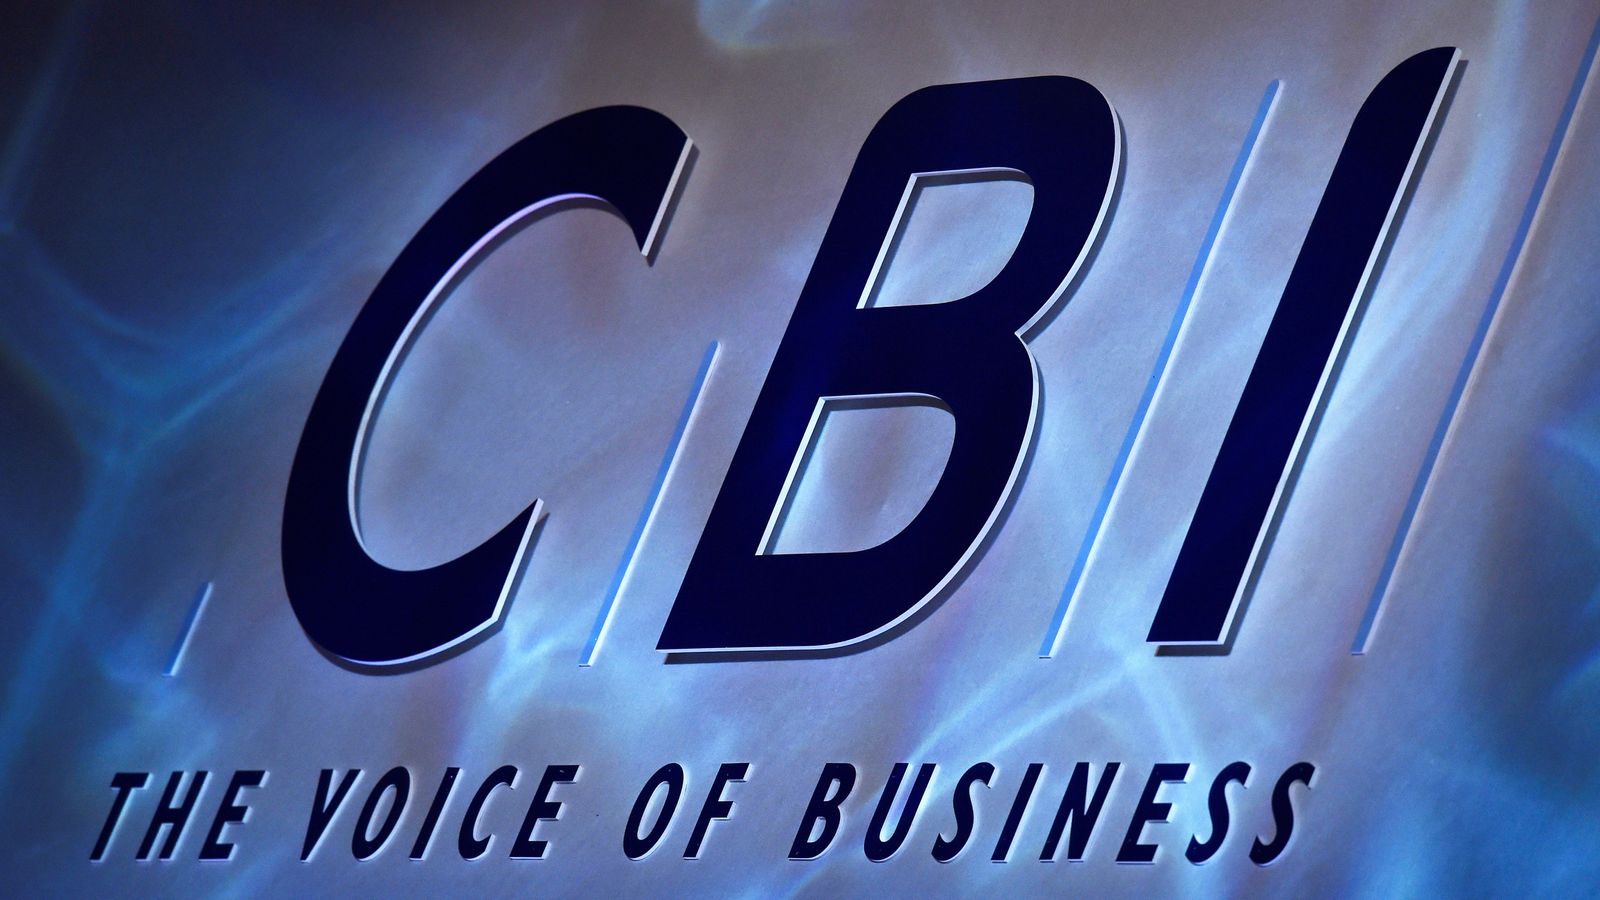 CBI extends overdraft in fresh move to shore up finances